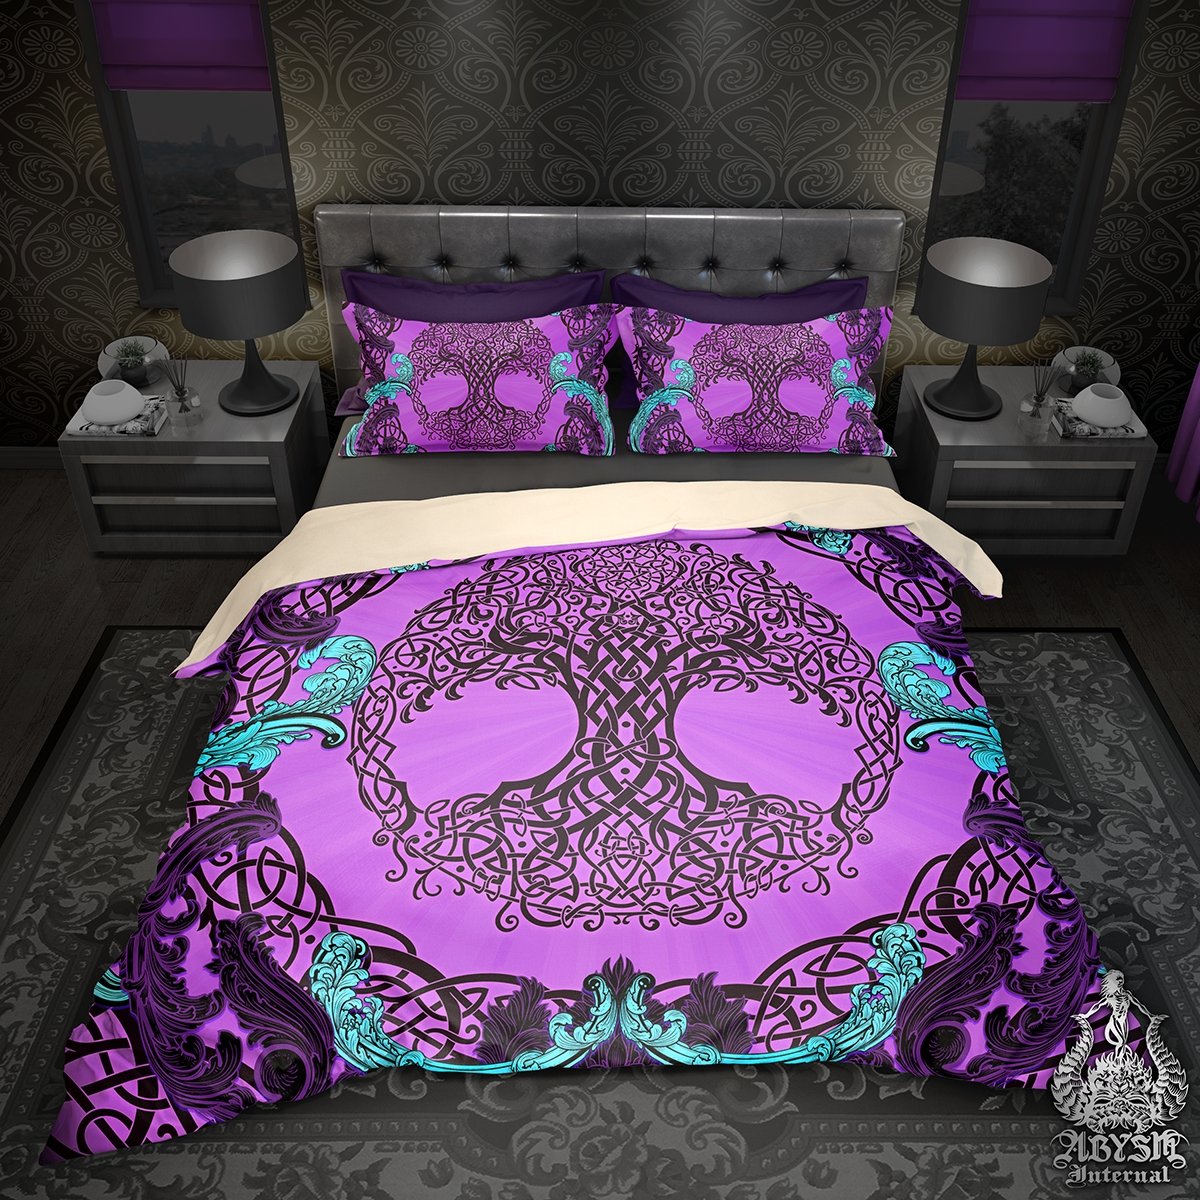 Tree of Life Bedding Set, Comforter and Duvet, Witch Bed Cover, Witchy Bedroom Decor, King, Queen and Twin Size - Celtic, Pastel Goth, Purple - Abysm Internal